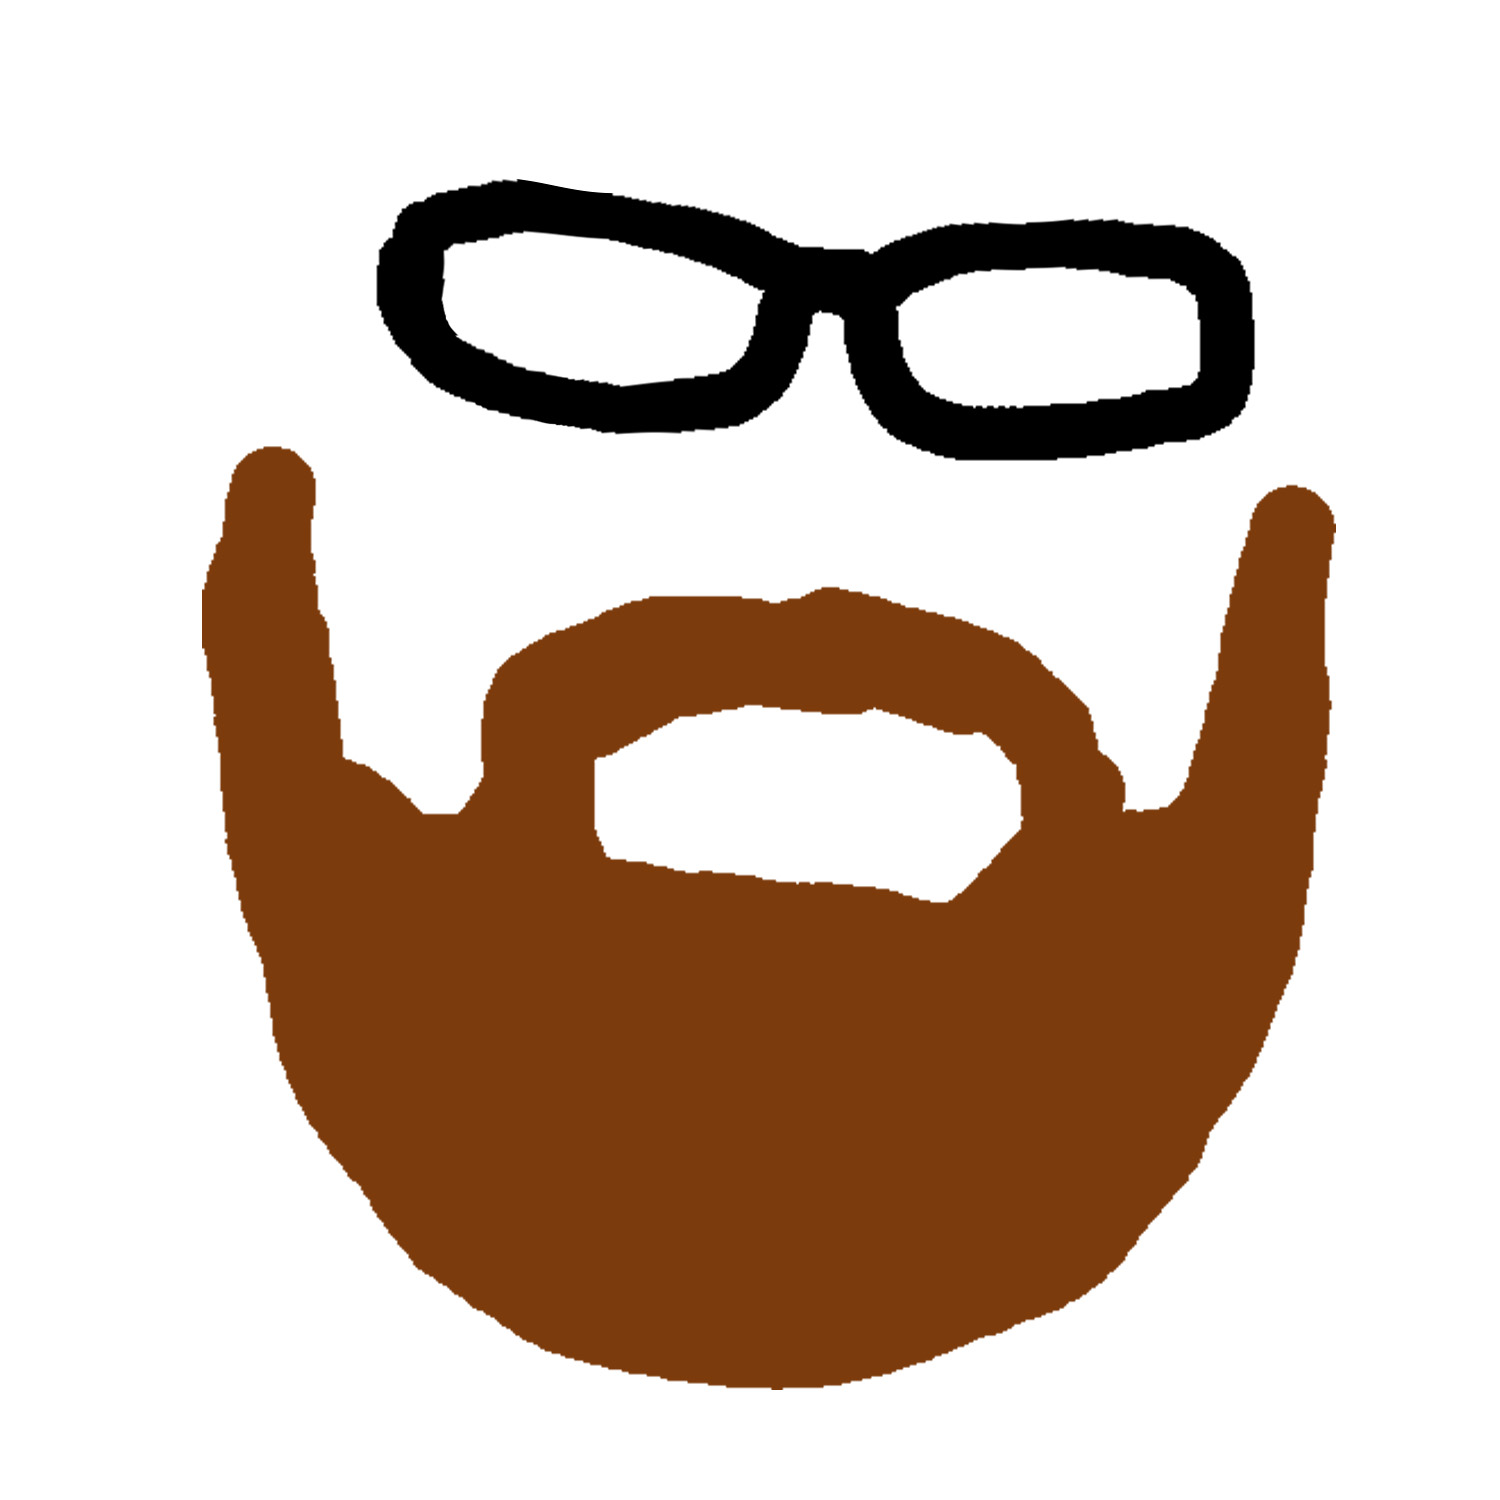 Beard Clipart - Adding Style and Personality to Your Designs